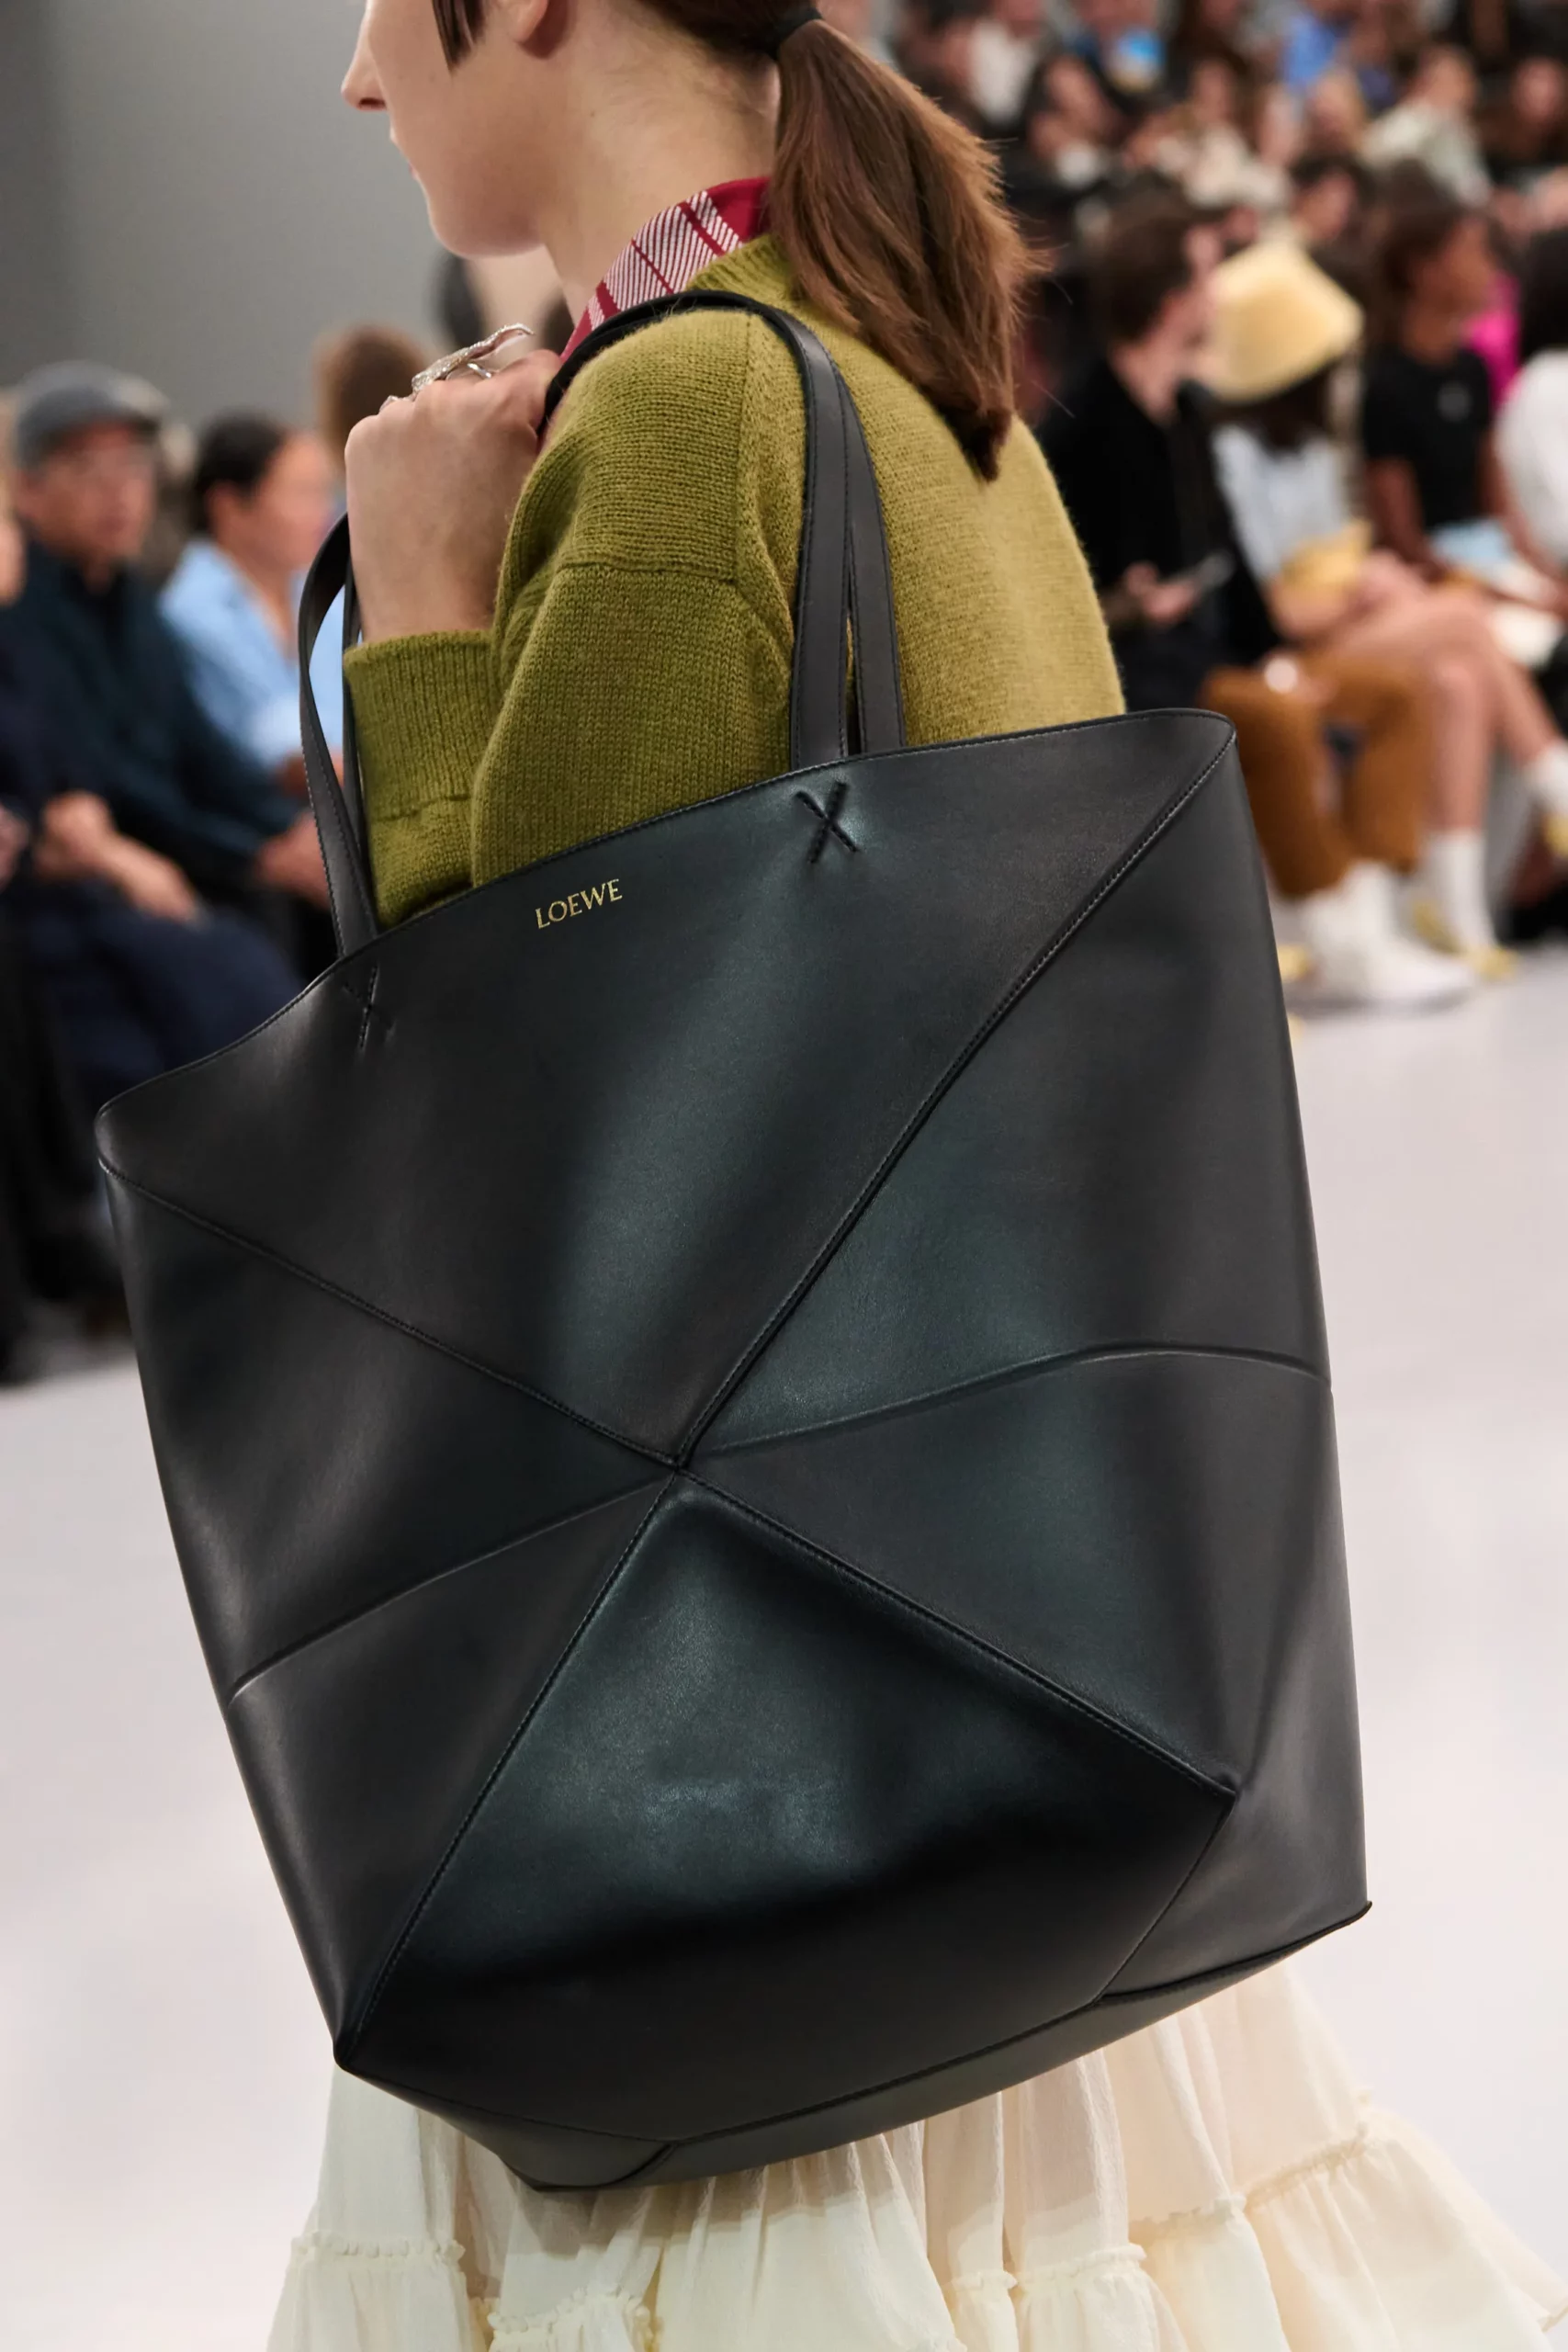 The Best Loewe Handbags of 2023 to Shop Right Now, From the